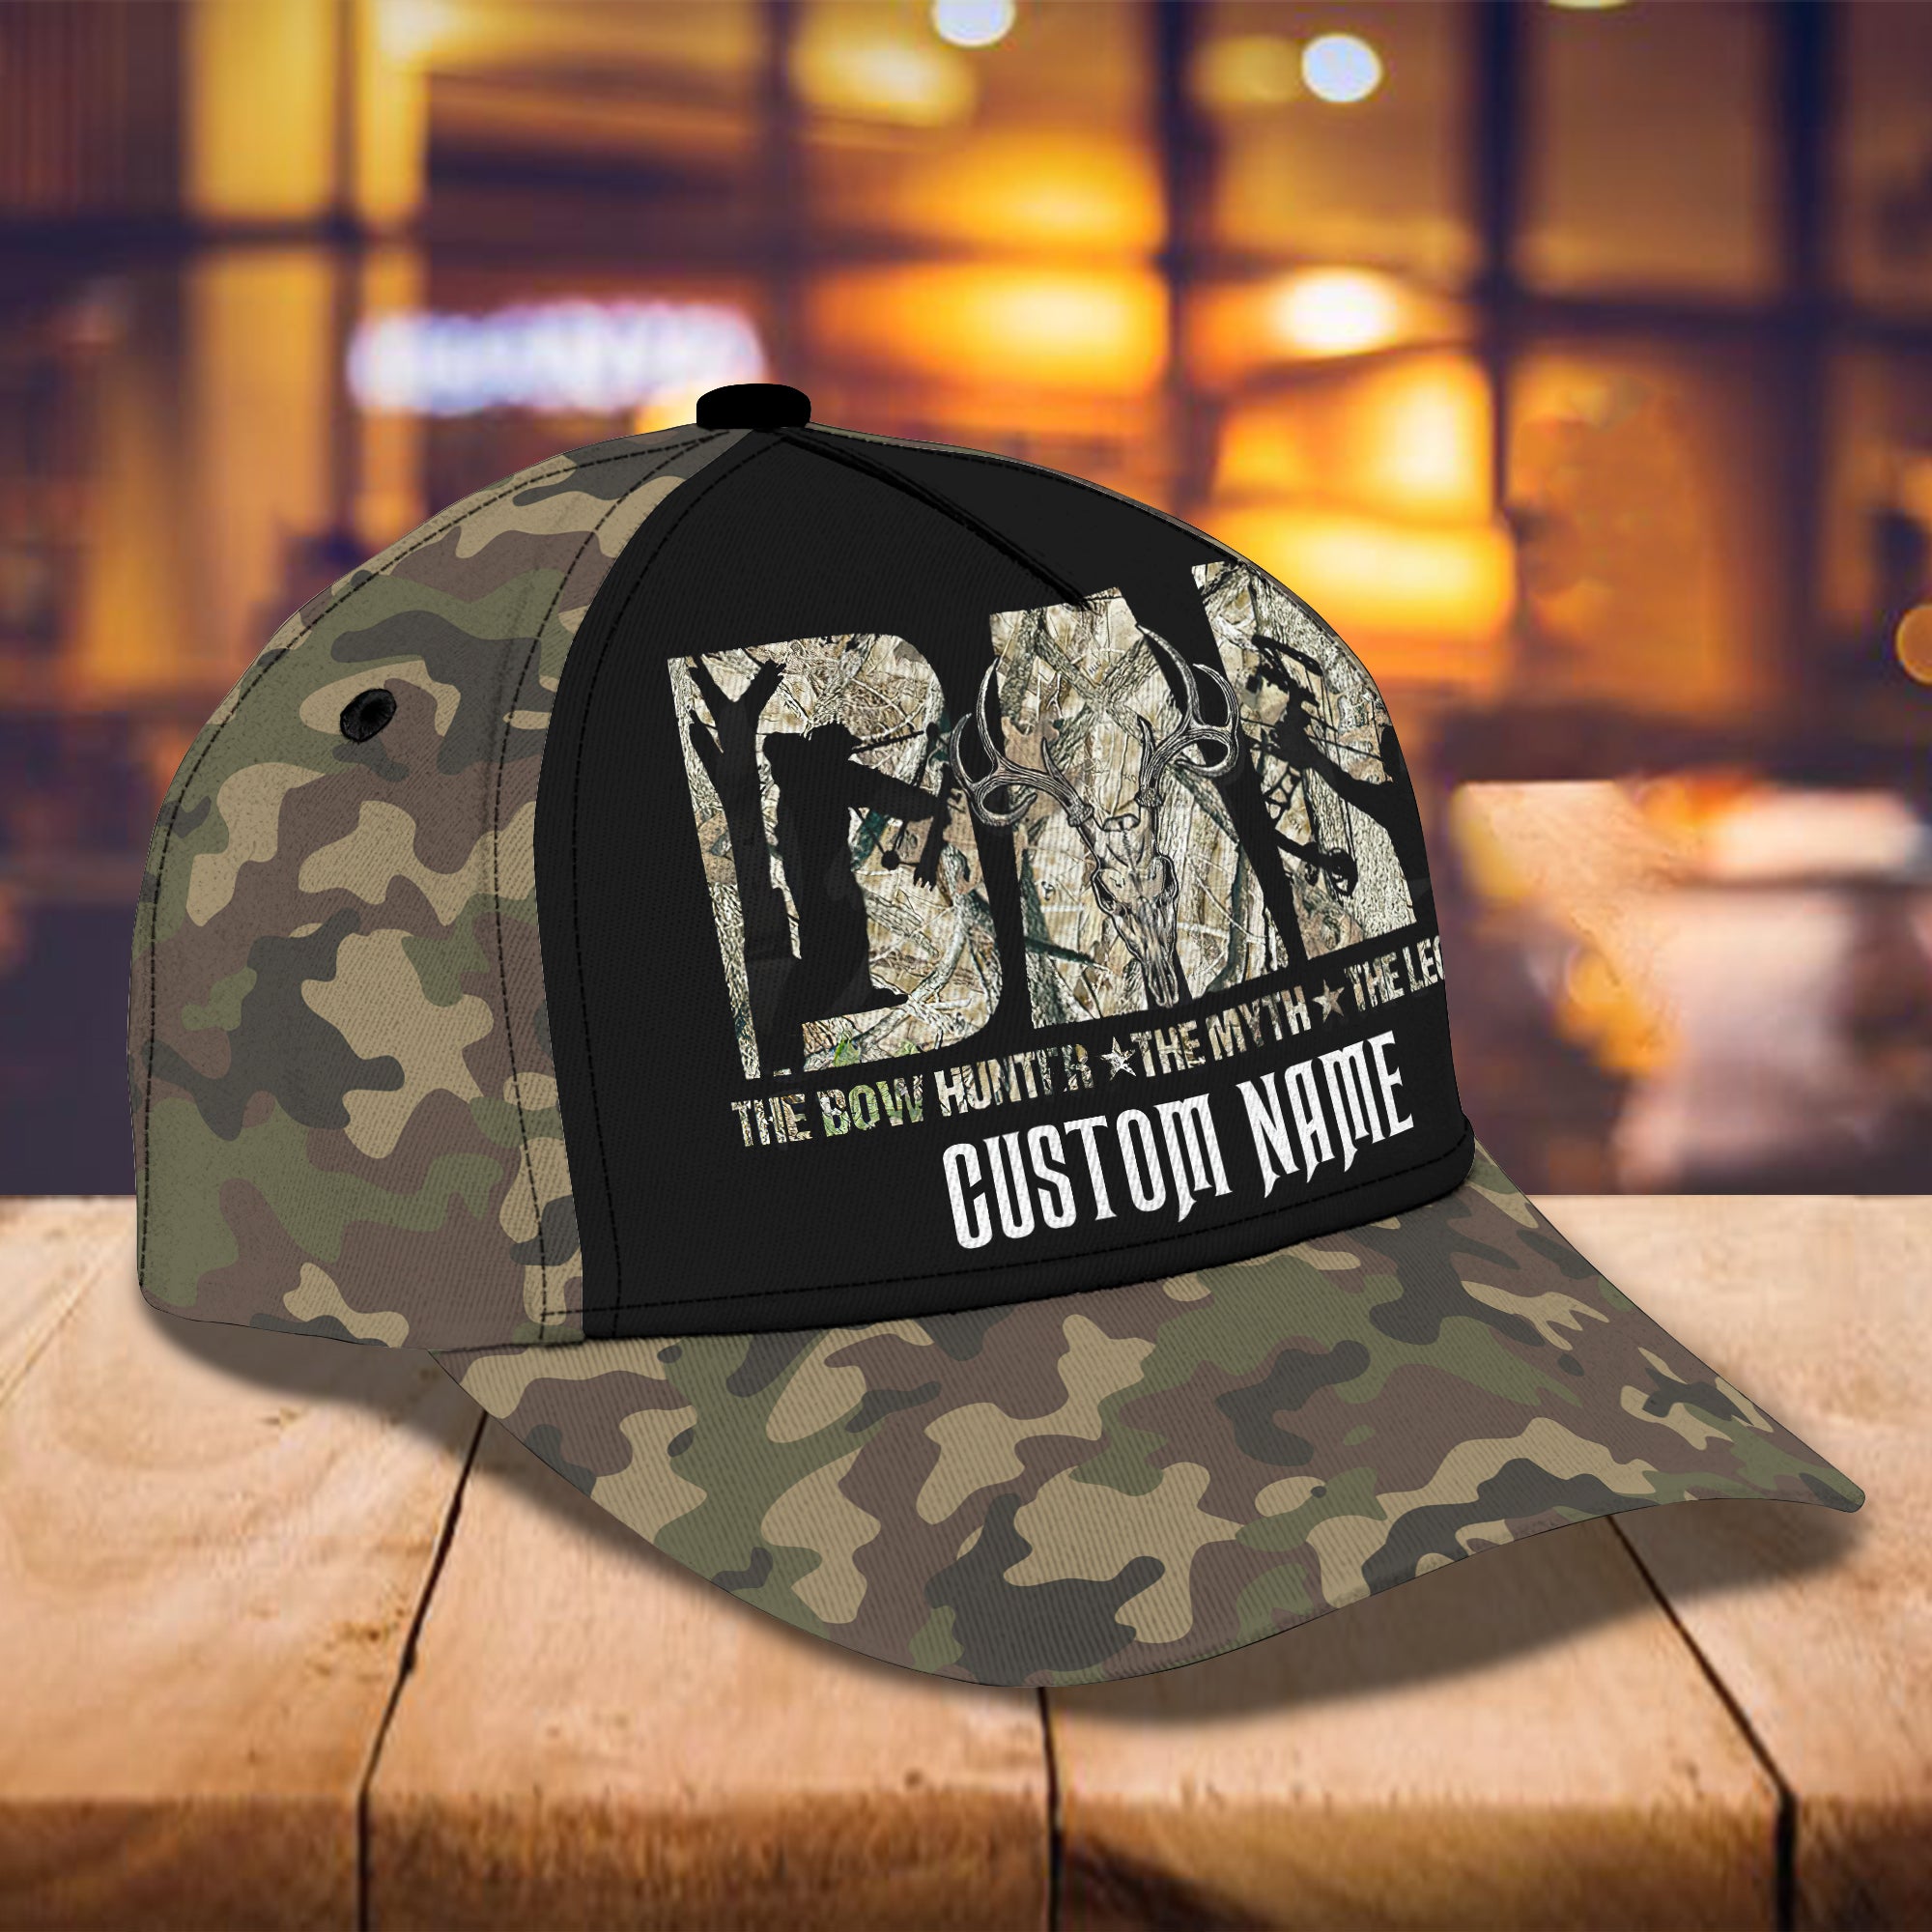 Hunting Dad - Personalized Name Cap